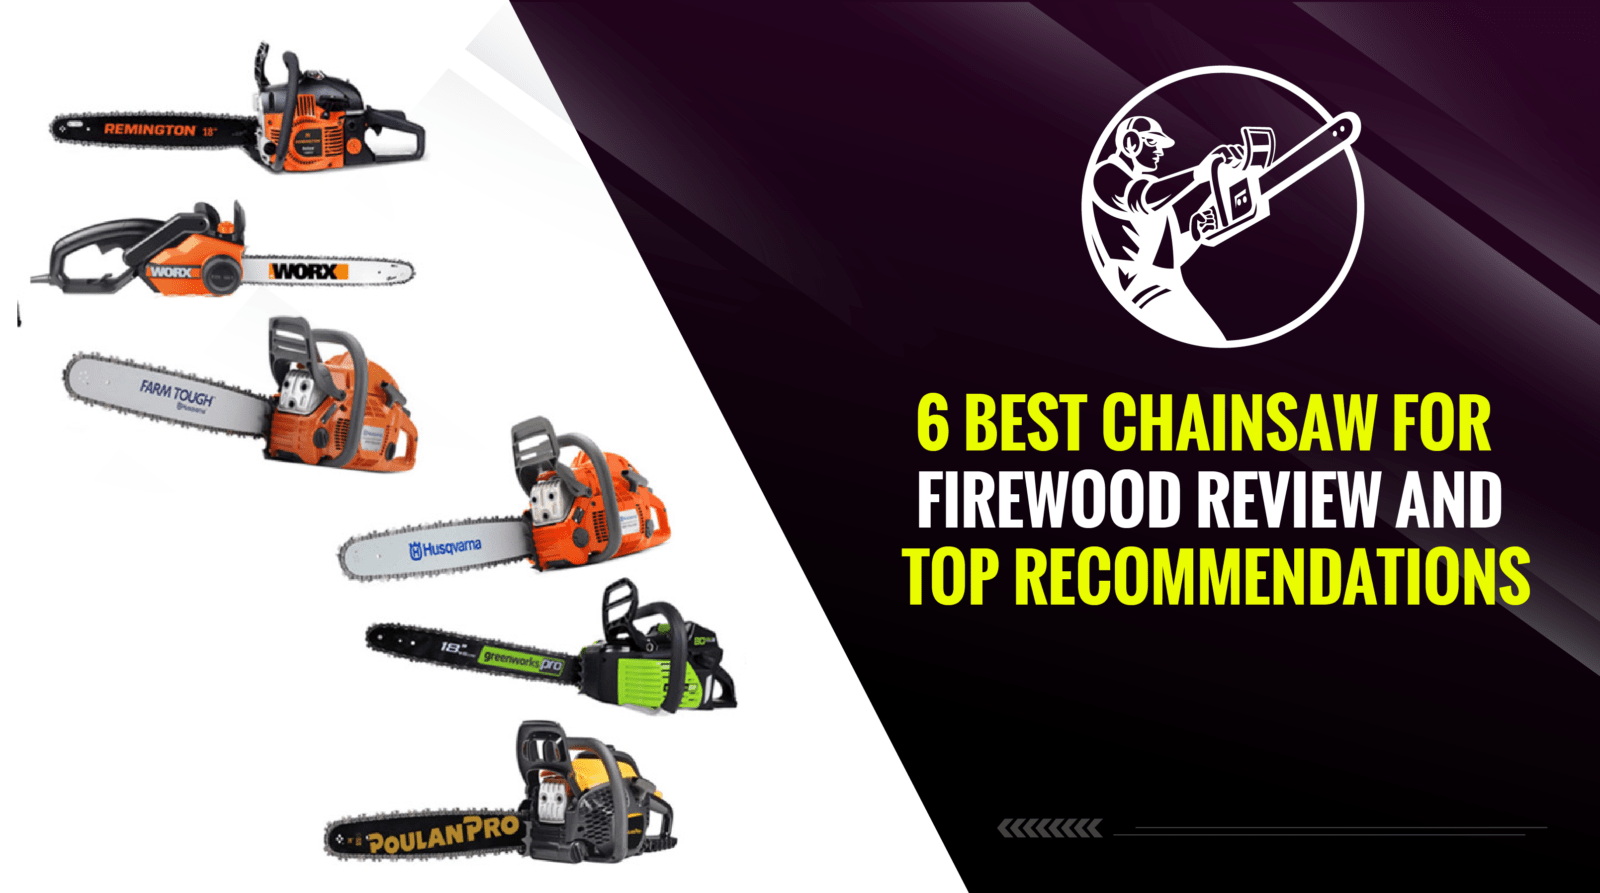 Best Chainsaw for Firewood